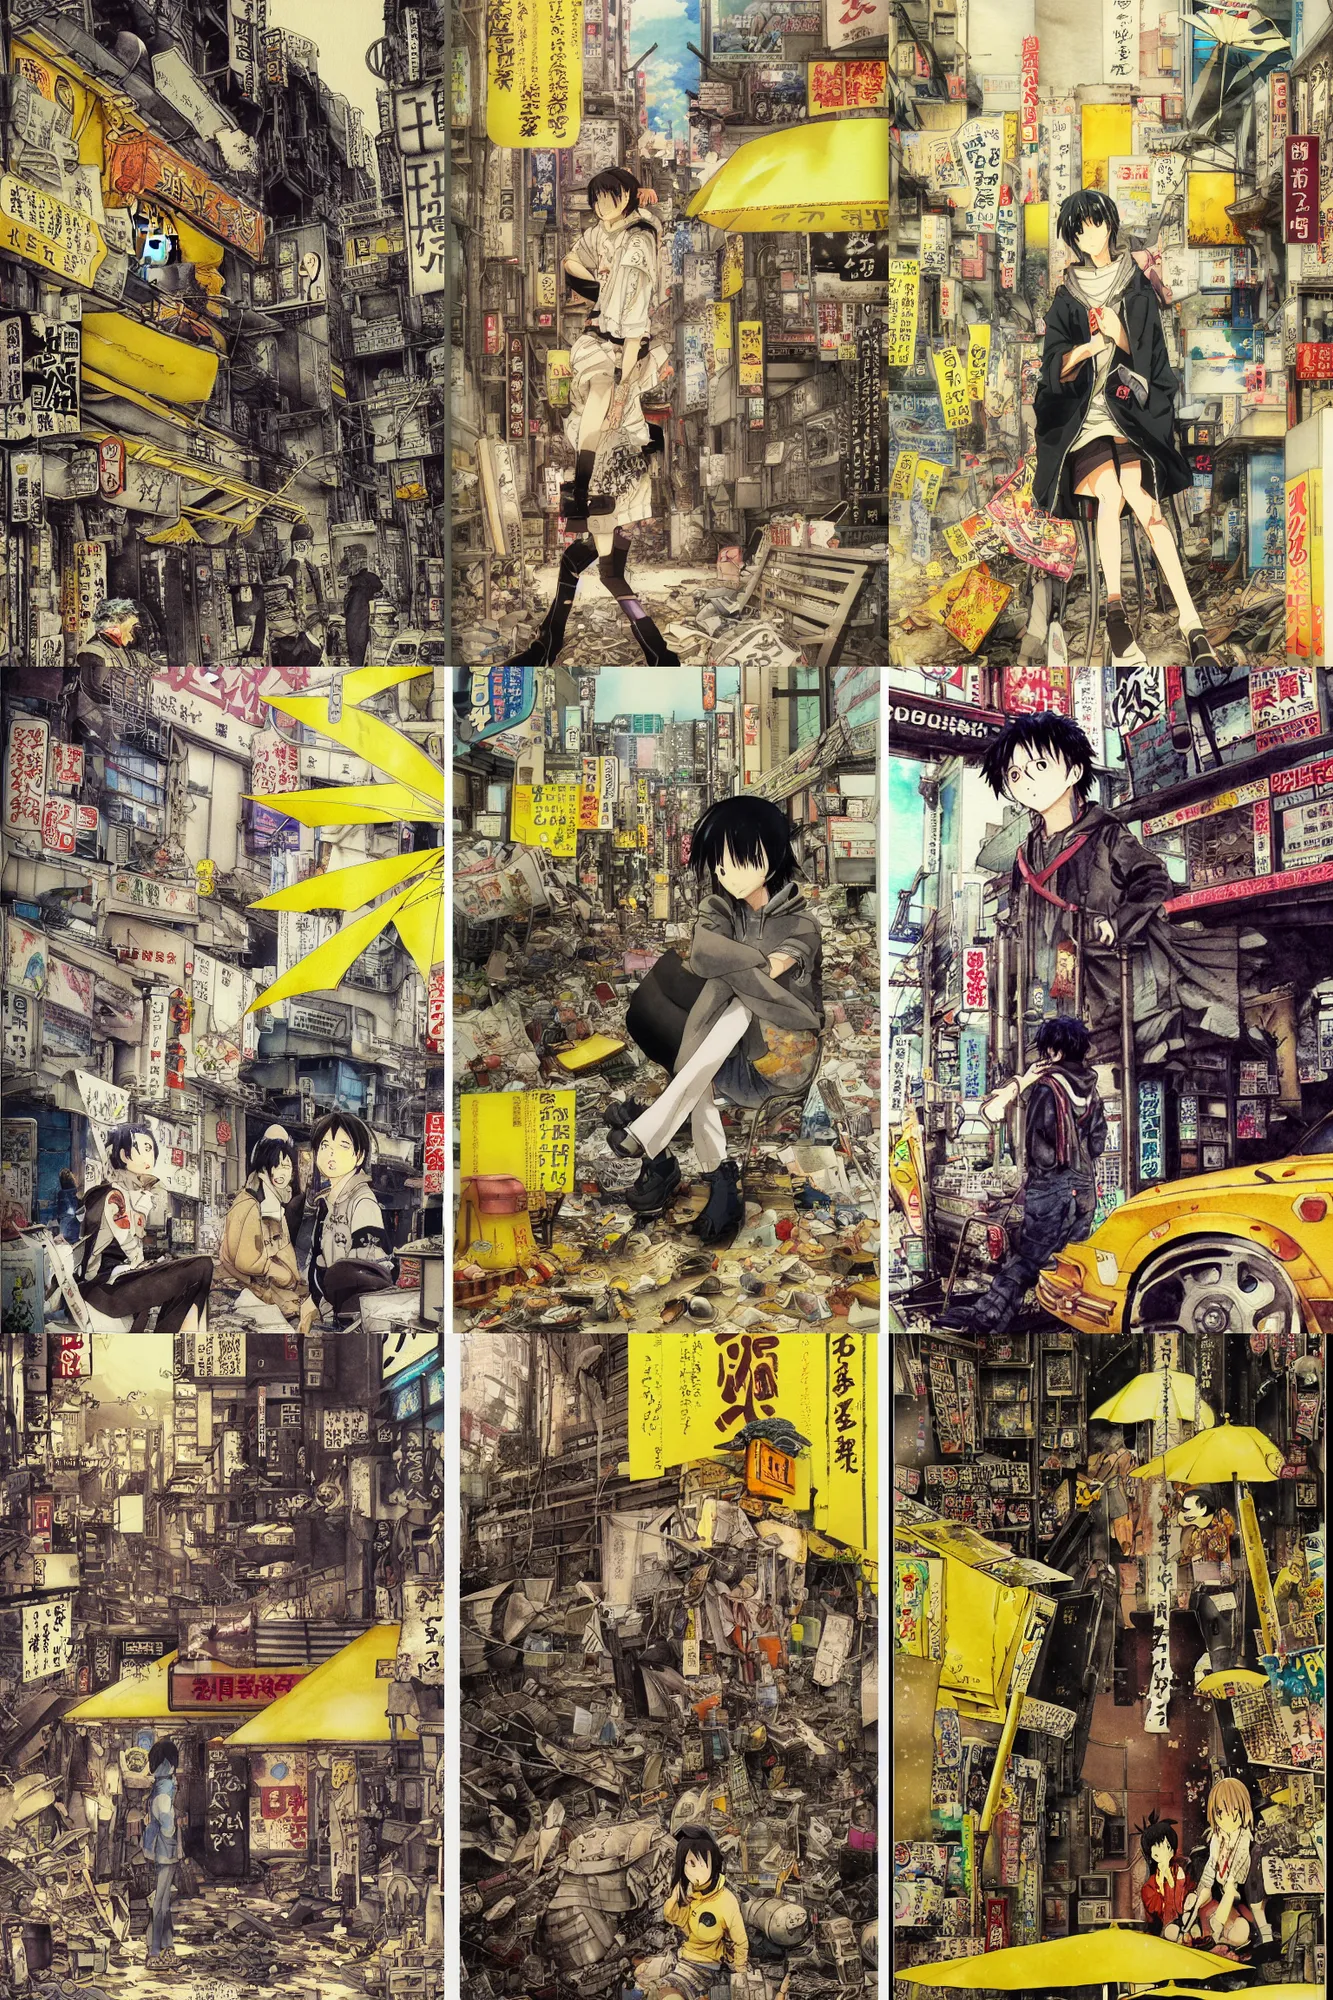 Prompt: tatsuyuki tanaka anime movie poster, genius party,shinjuku, koju morimoto, katsuya terada, masamune shirow, tatsuyuki tanaka, detailed watercolor, paper texture, movie scene, distant shot of hoody girl side view sitting under a yellow striped parasol in deserted dusty shinjuku junk town, old pawn shop, bright sun bleached ground ,scary chameleon face muscle robot monster lurks in the background, ghost mask, teeth, animatronic, black smoke, pale beige sky, junk tv, texture, strange, impossible, fur, spines, mouth, pipe brain, shell, brown mud, dust, bored expression, overhead wires, telephone pole, dusty, dry, pencil marks, hd, 4k, remaster, dynamic camera angle, deep 3 point perspective, fish eye, dynamic scene